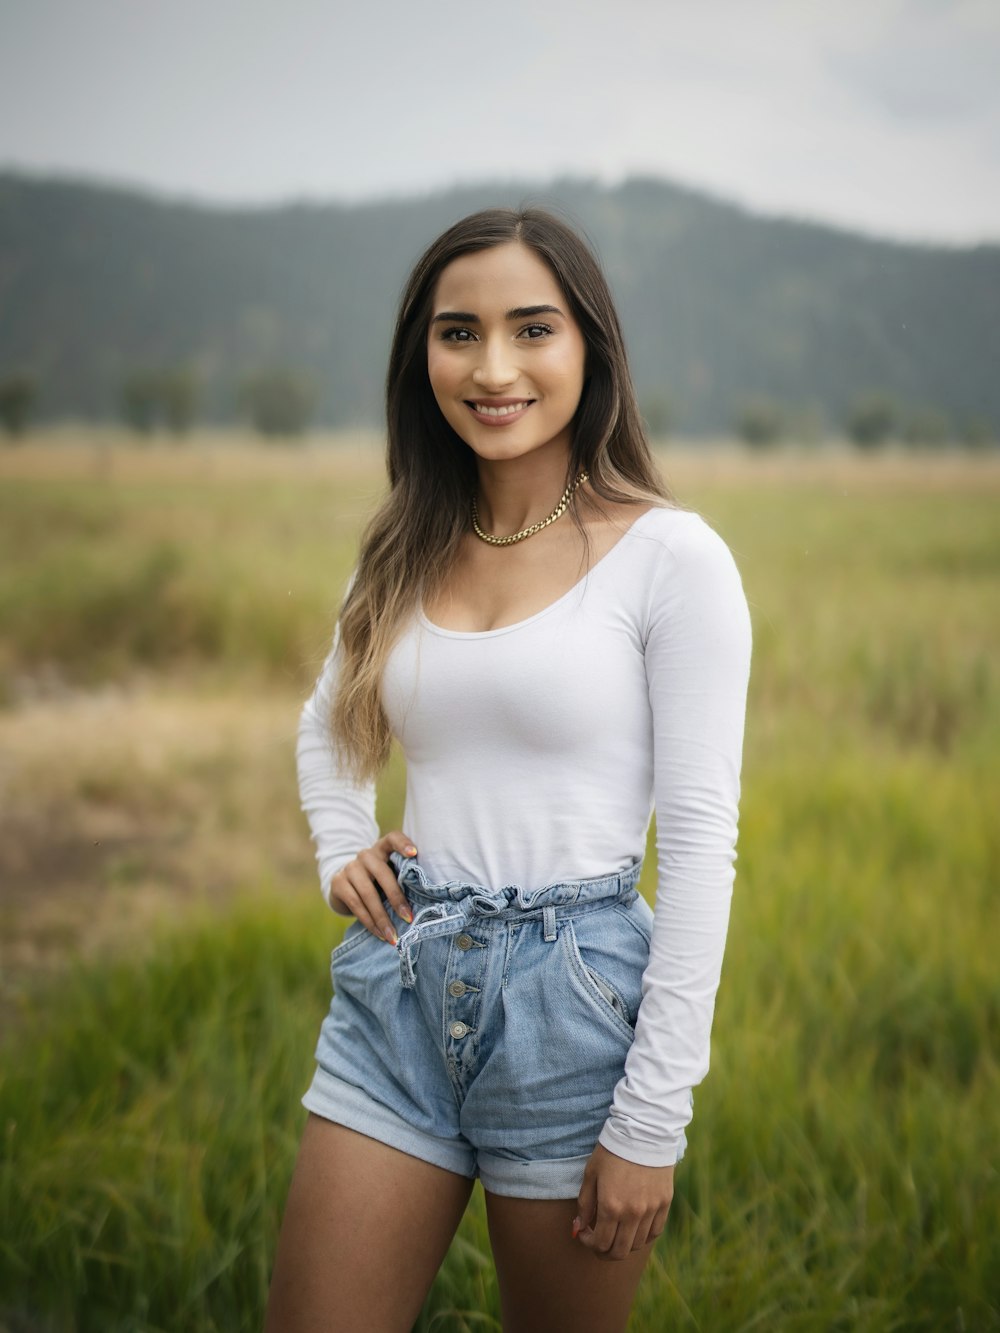 woman in white long sleeve shirt and blue denim shorts standing on green grass field during